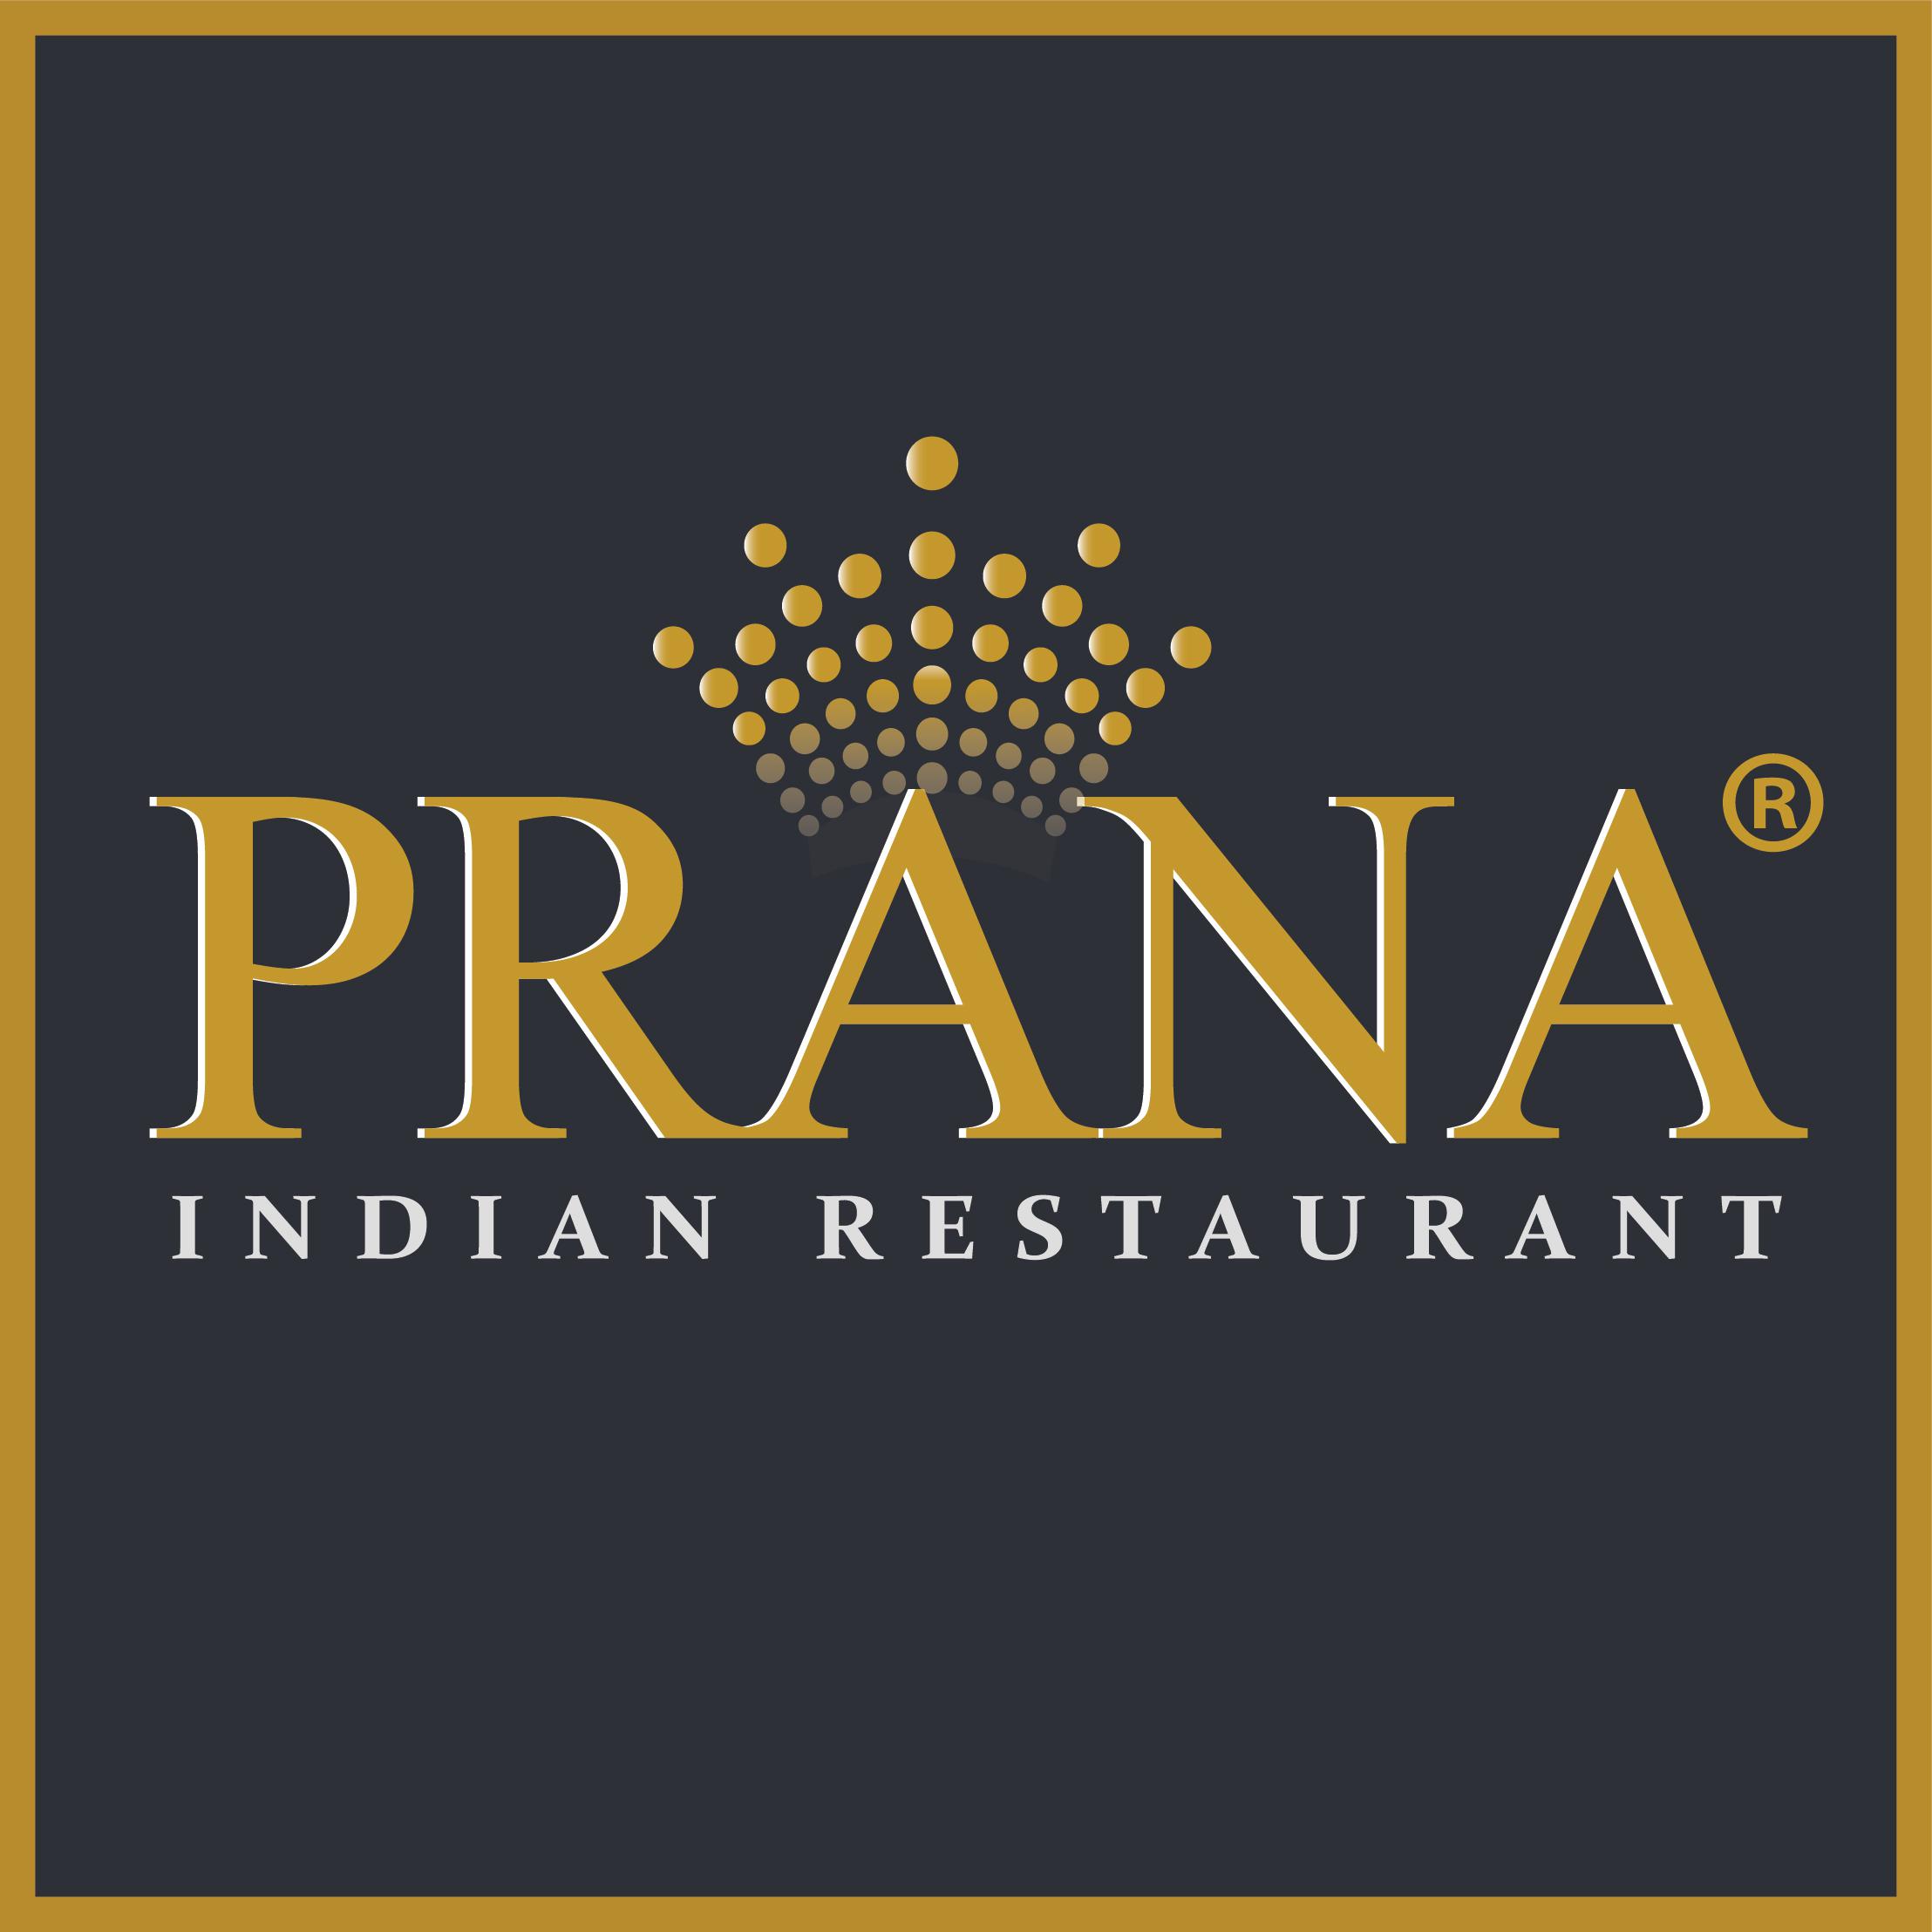 Prana Indian Restaurant - Indian Restaurant, Restaurant Delivery ...